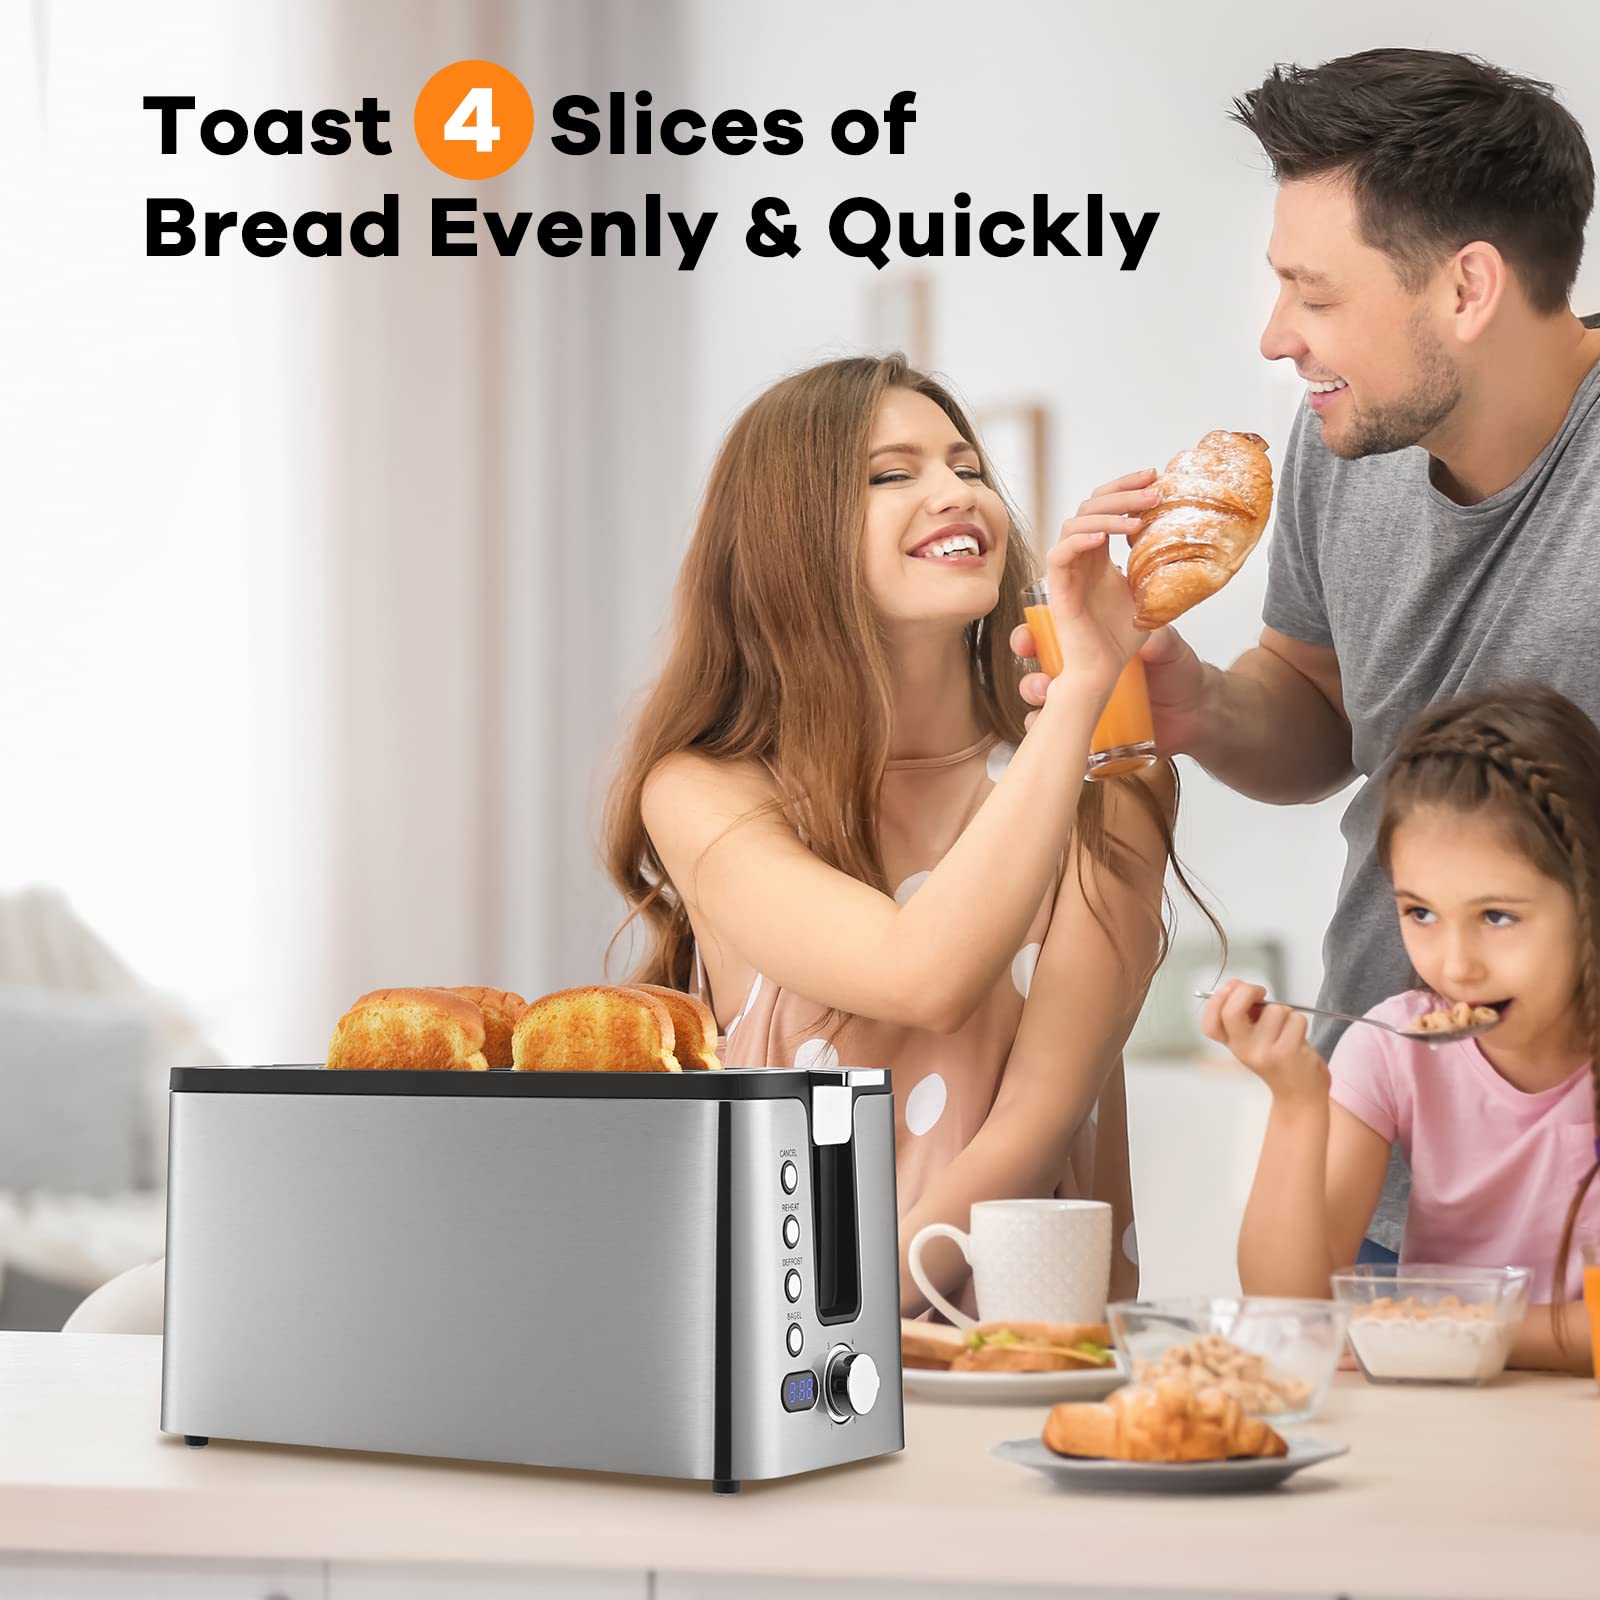 Mecity 4 Slice Toaster, Long Slot Toaster With Countdown Timer, Bagel / Defrost / Reheat / Cancel Functions,Warming Rack, removable Crumb Tray, 6 Browning Settings, Extra Wide Long Slots, Stainless Steel Bread Toaster, 1300 Watts